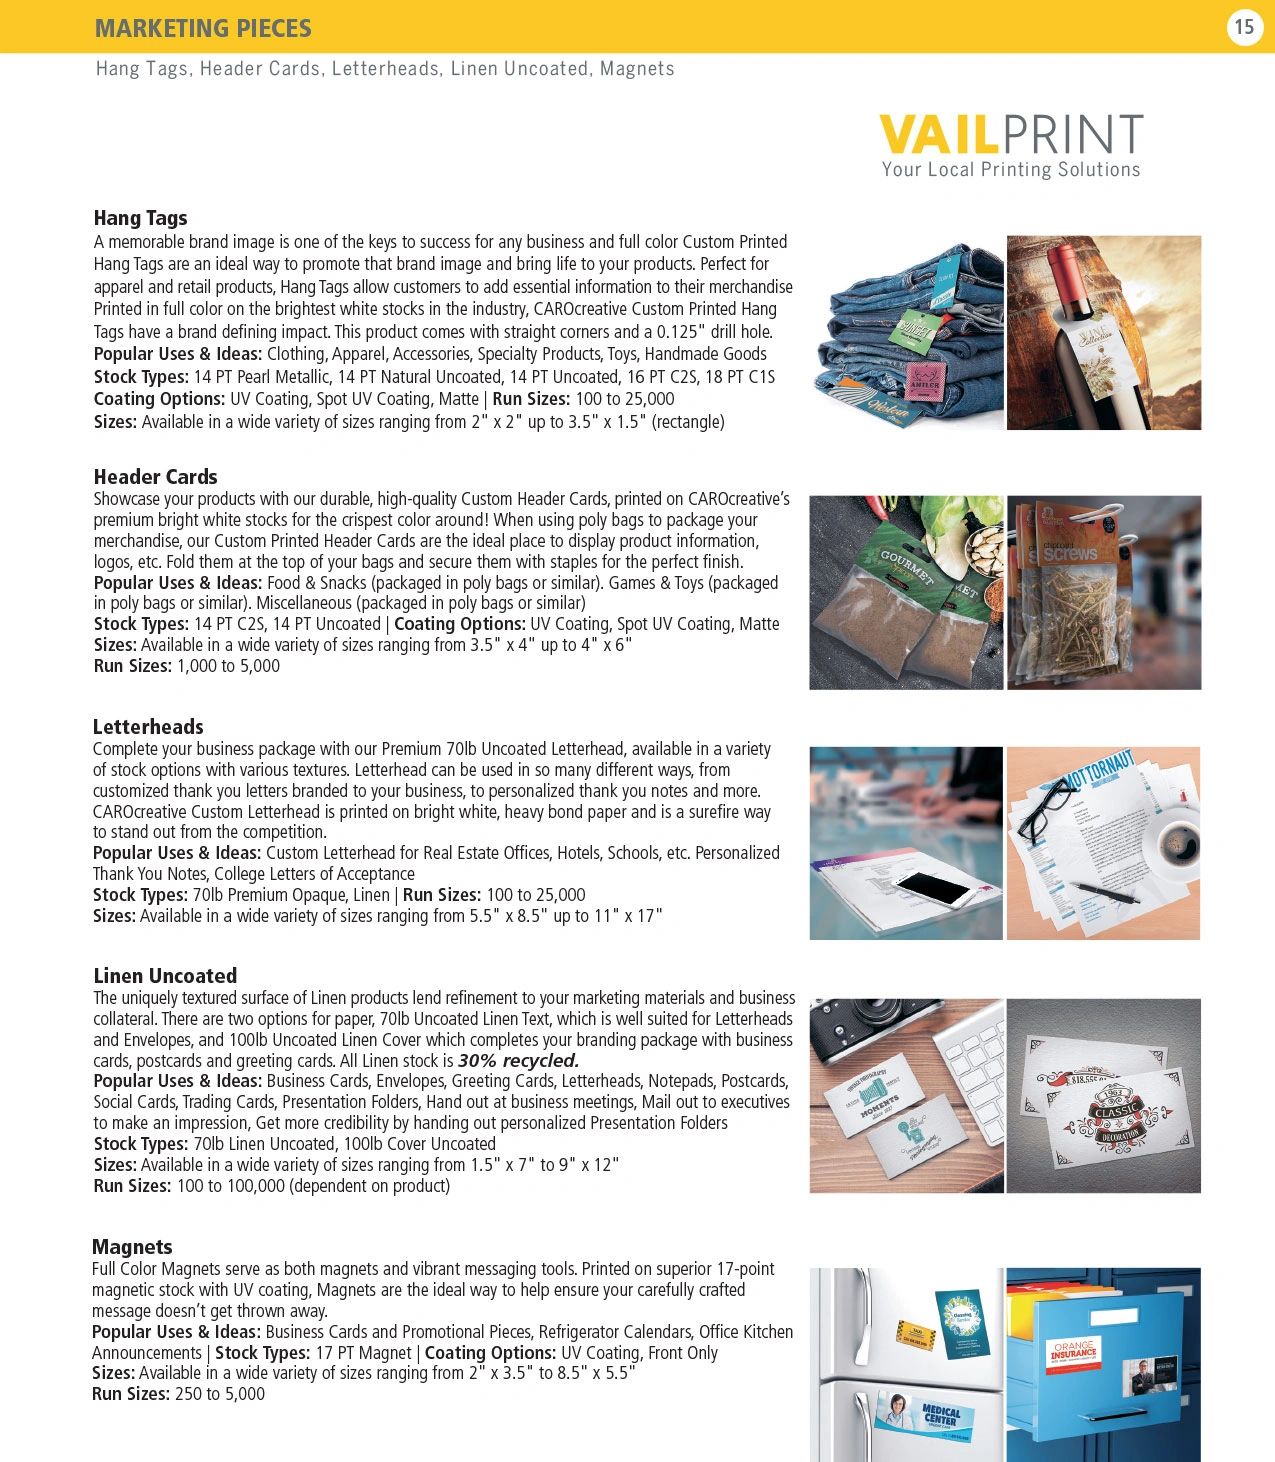 Hang Tags, header cards, letterheads, linen uncoated, magnets, Graphic Design, Vail Print, Caro 